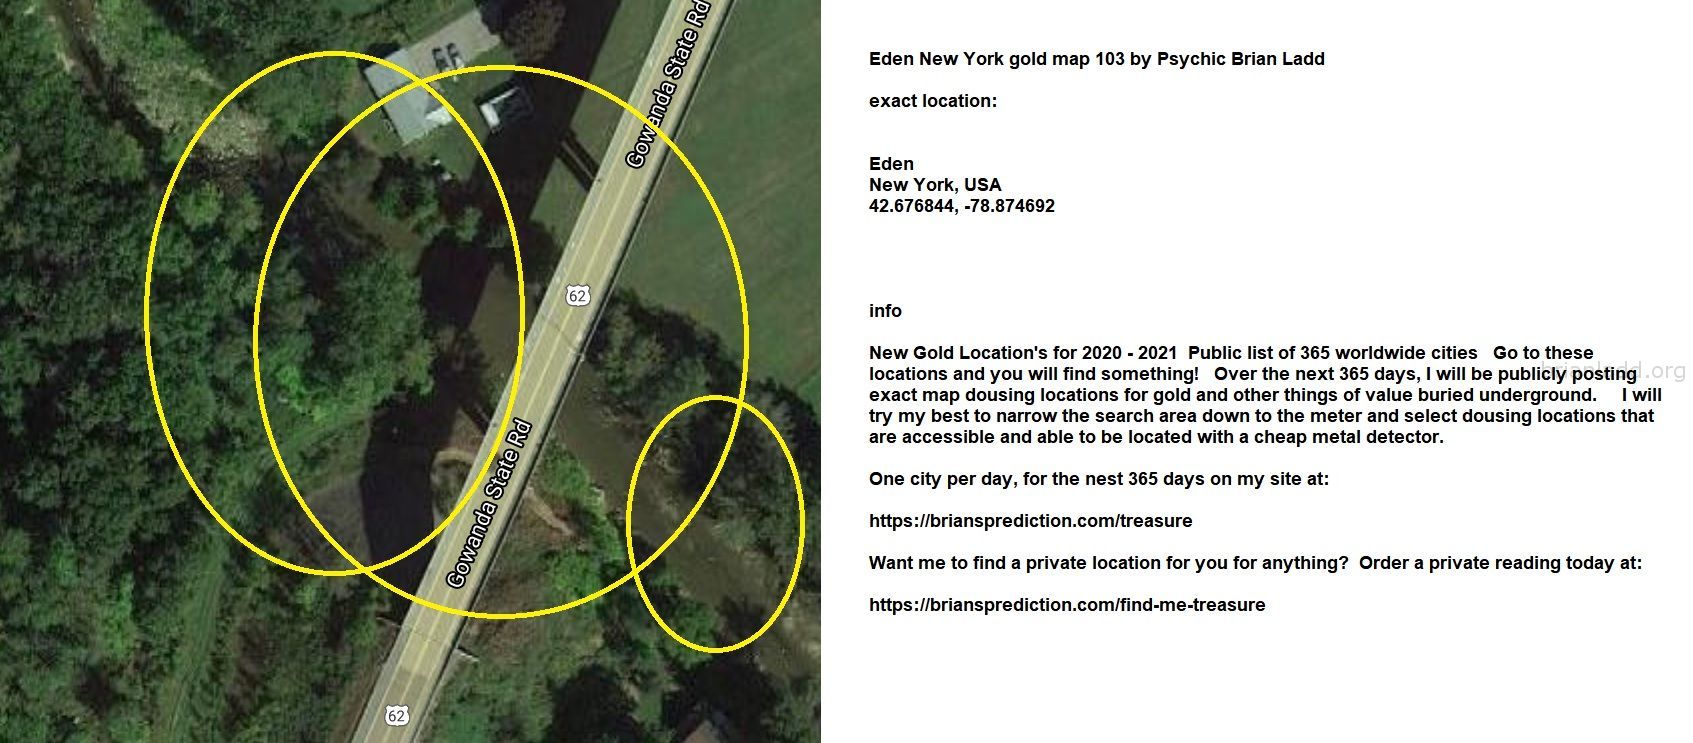 Eden New York Gold Map 104 By Psychic Brian Ladd - Eden New York Gold Map 103 By Psychic Brian Ladd  Exact Location:  Ed...
Eden New York Gold Map 103 By Psychic Brian Ladd  Exact Location:  Eden  New York, Usa  42.676844, -78.874692  Info  New Gold Location'S For 2020 - 2021  Public List Of 365 Worldwide Cities  Go To These Locations And You Will Find Something!  Over The Next 365 Days, I Will Be Publicly Posting Exact Map Dousing Locations For Gold And Other Things Of Value Buried Underground.  I Will Try My Best To Narrow The Search Area Down To The Meter And Select Dousing Locations That Are Accessible And Able To Be Located With A Cheap Metal Detector.  One City Per Day, For The Nest 365 Days On My Site At:   https://briansprediction.com/Treasure  Want Me To Find A Private Location For You For Anything?  Order A Private Reading Today At:   https://briansprediction.com/Find-Me-Treasure
